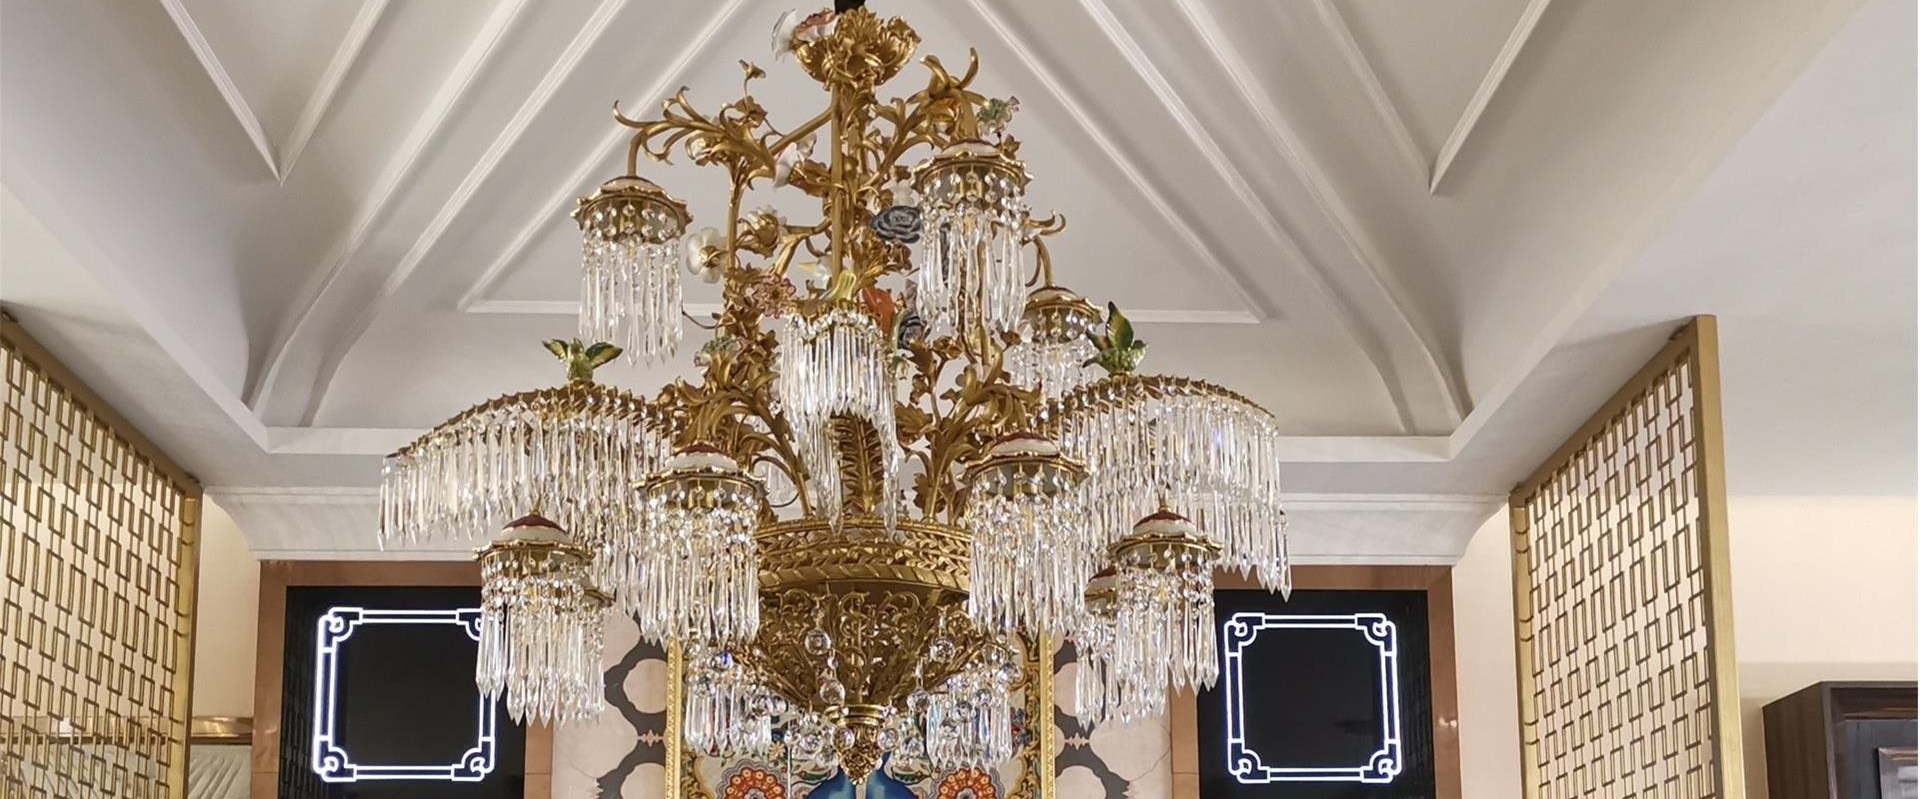 What qualifies a non-standard chandelier?